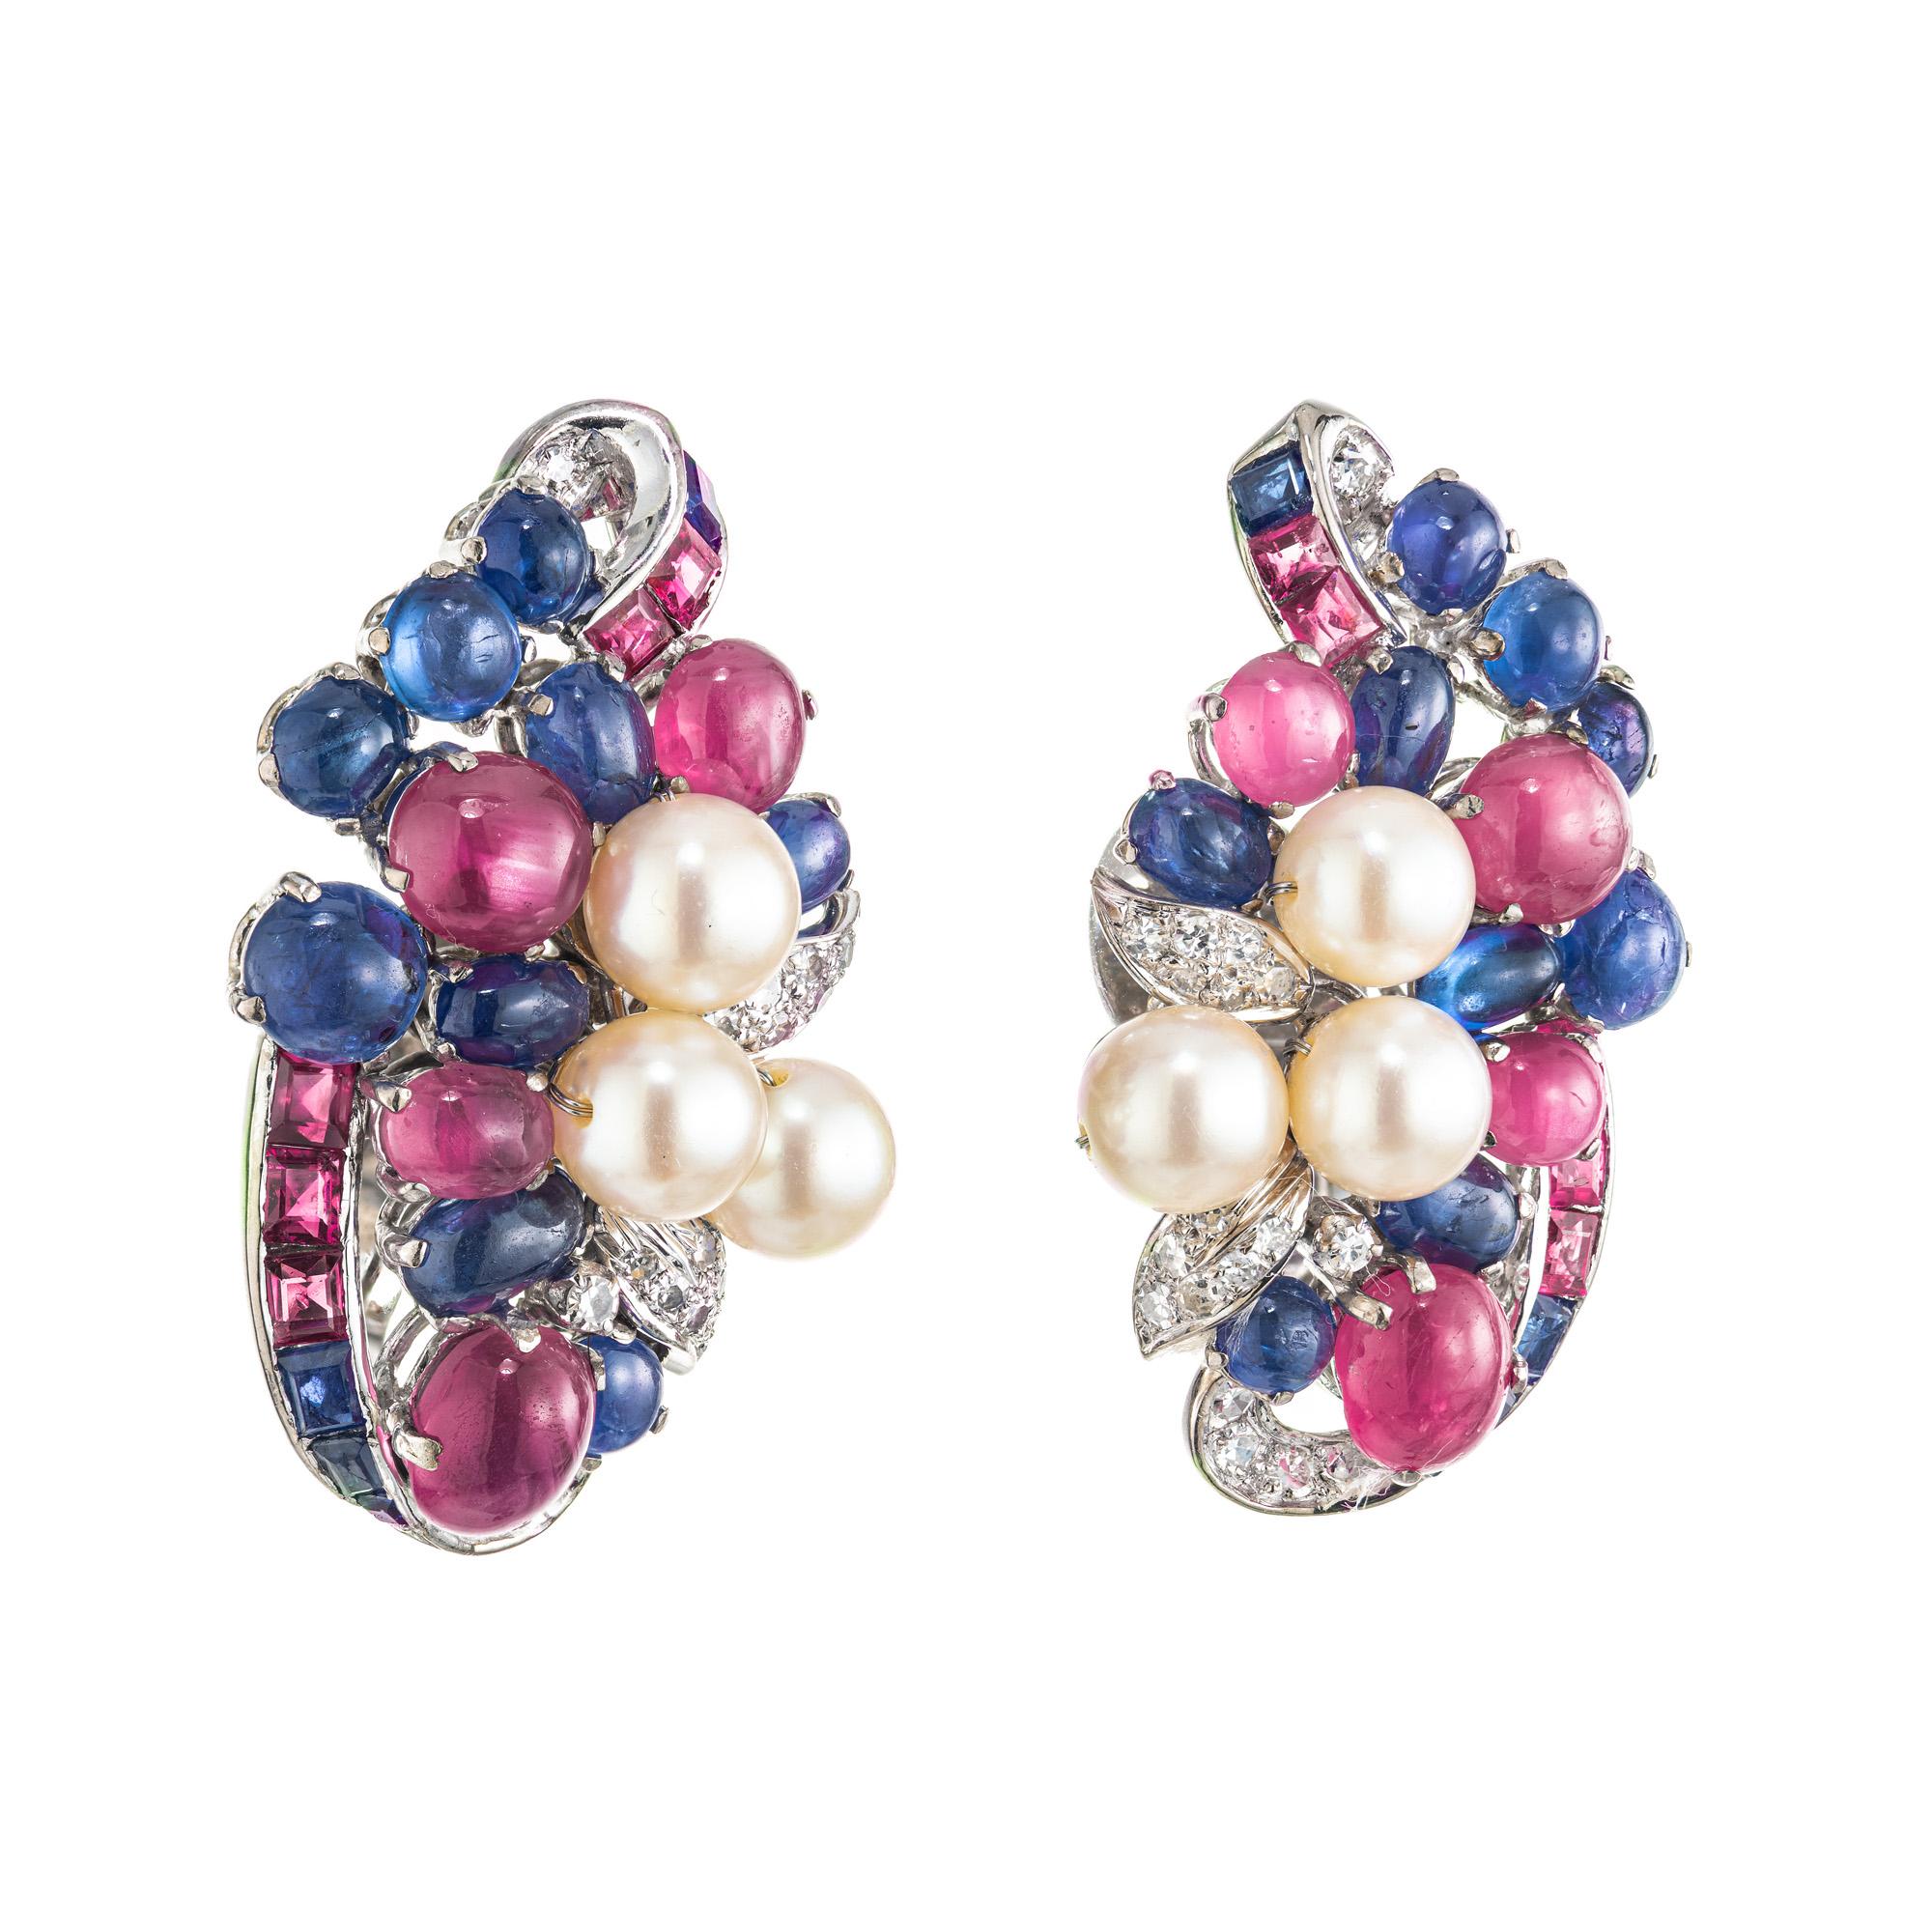 Wonderful large, yet secure clip post mid-century 1950's earrings in 14k white gold and set with 6.5 carats of natural star ruby and 4.80 carats of natural star sapphire with pearl and diamond accents. The pearls are undyed cultured Akoya pearls.